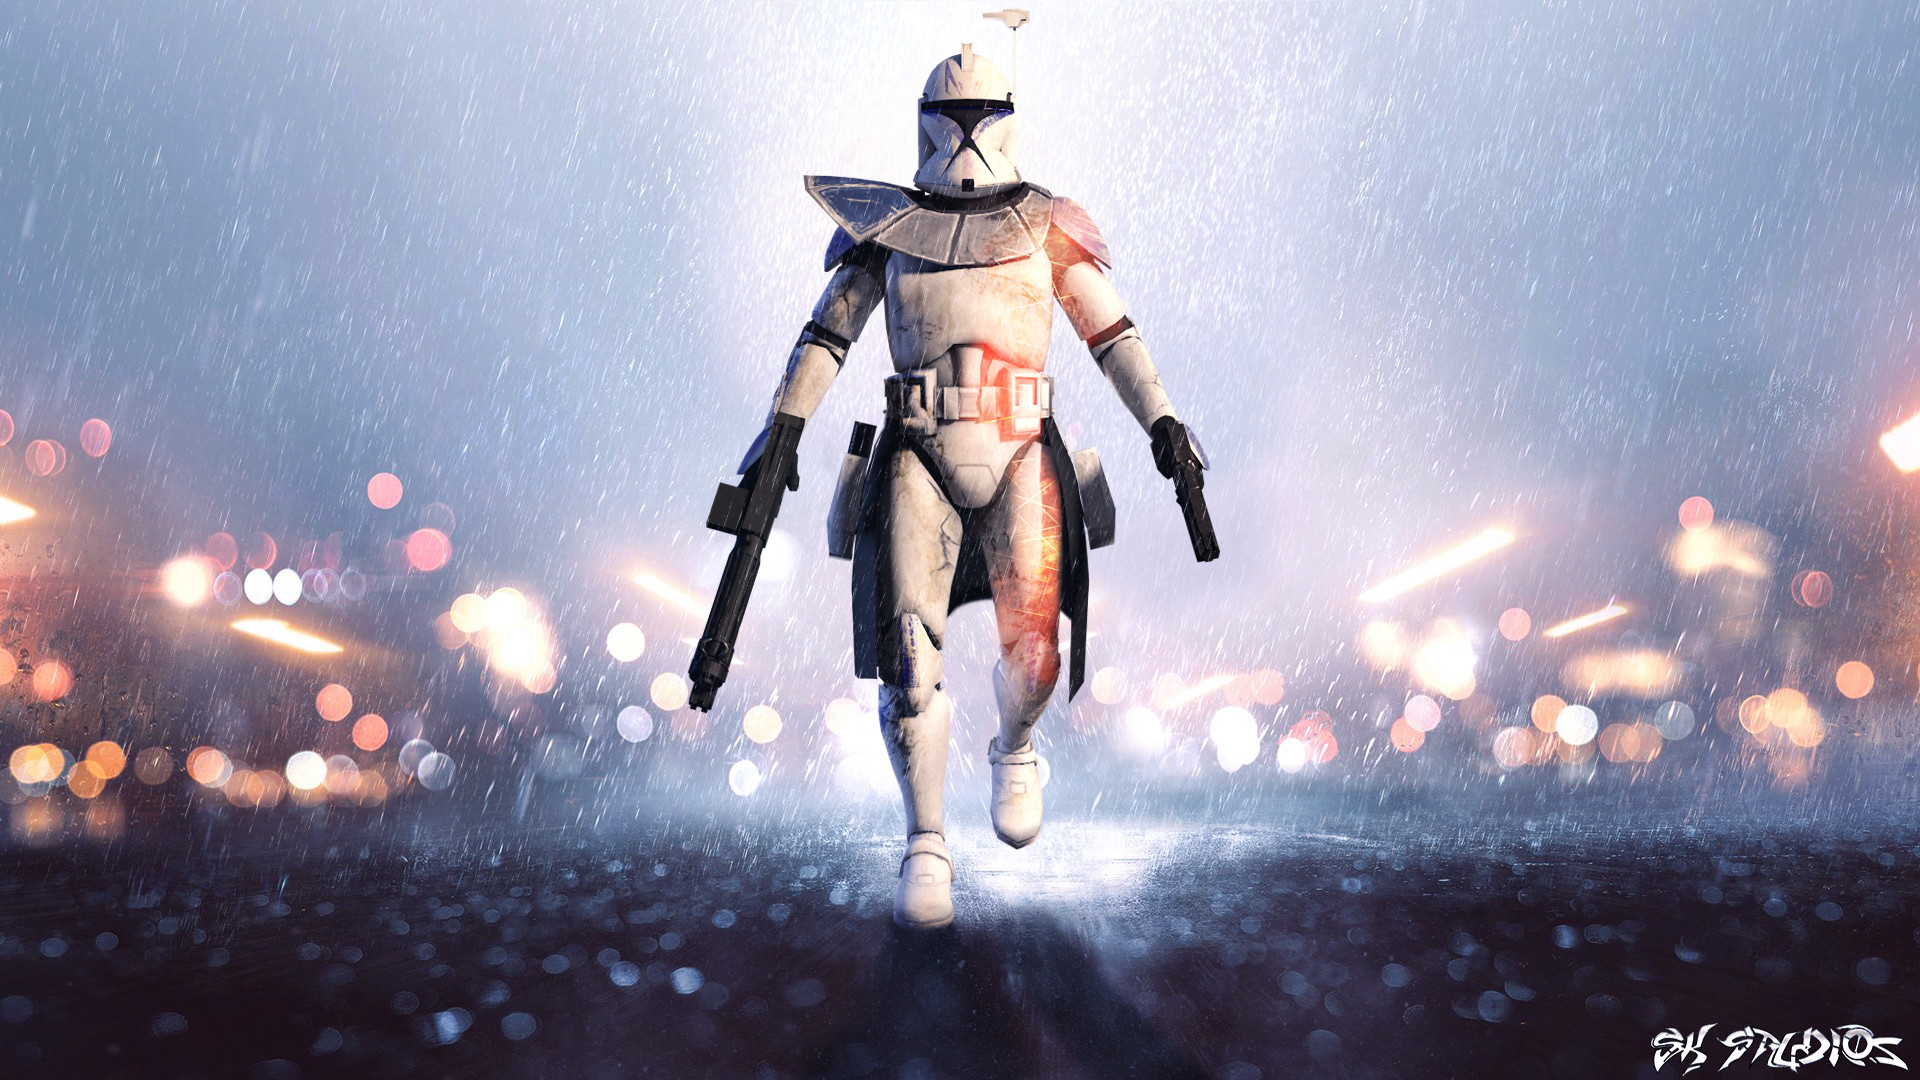 1920x1080 Showing Gallery For Star Wars Clone Trooper Wallpaper Iphone